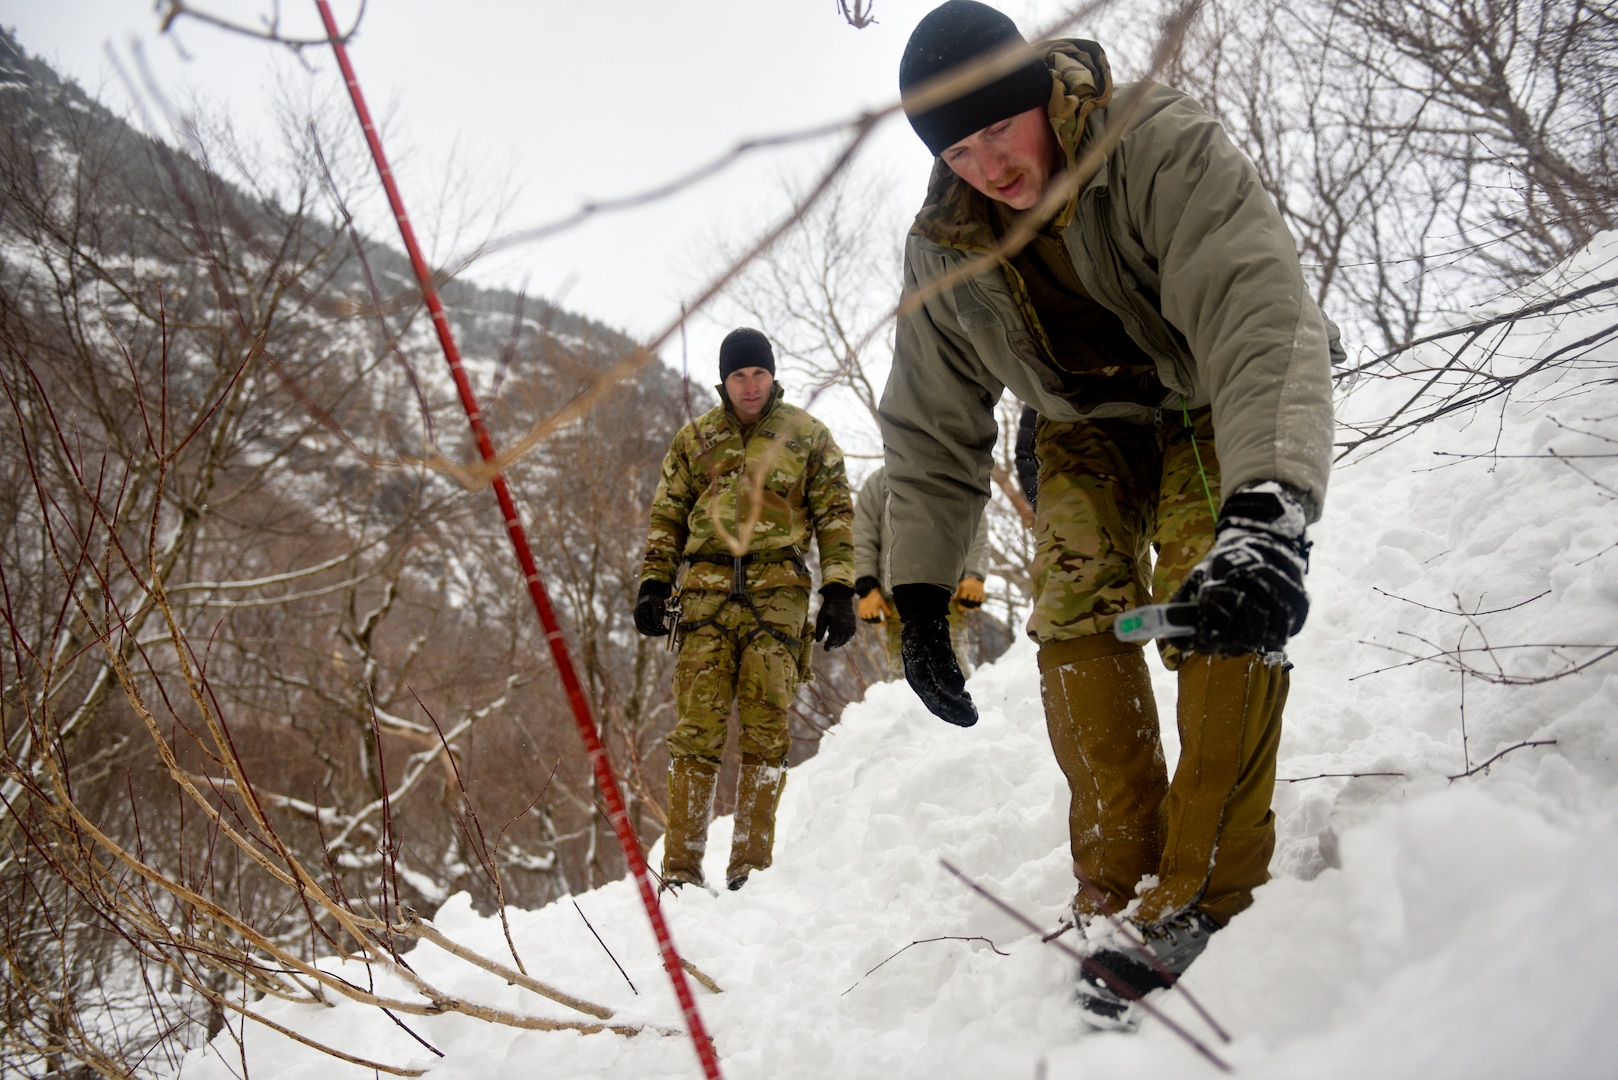 Sgt. 1st Class Nick Ash, an instructor at the U.S. Army Mountain Warfare School, observes a student using a locator beacon to find a simulated casualty during avalanche rescue training as part of the school’s Advanced Military Mountaineer Course Jan. 25, 2022. The AMWS is a U.S. Army Training and Doctrine Command school operated by the Vermont Army National Guard at Camp Ethan Allen Training Site, Vermont.